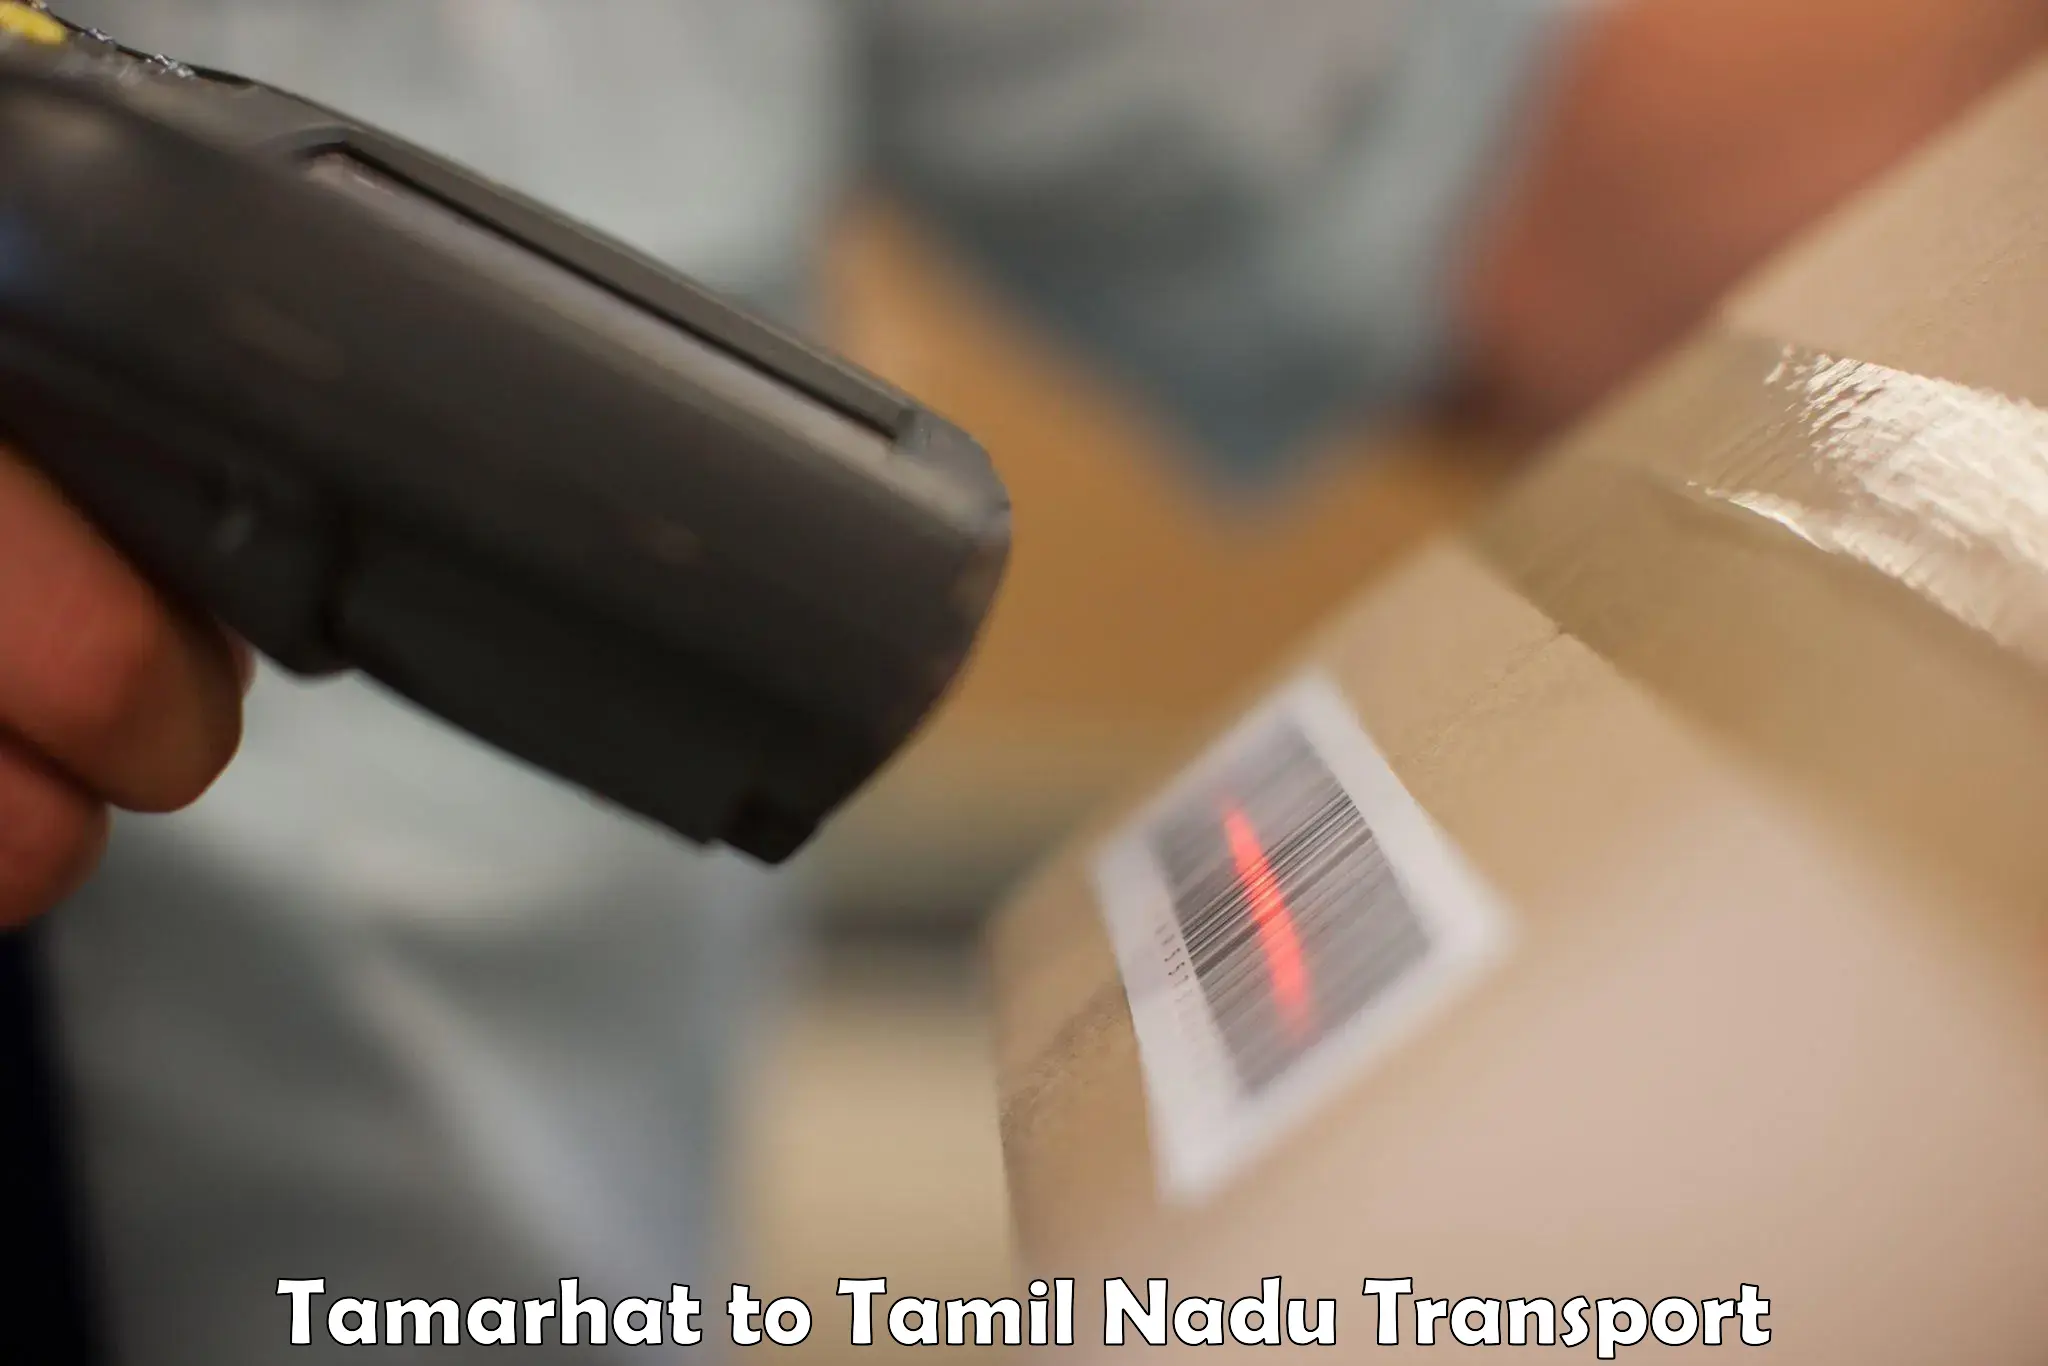 Air freight transport services Tamarhat to Coimbatore